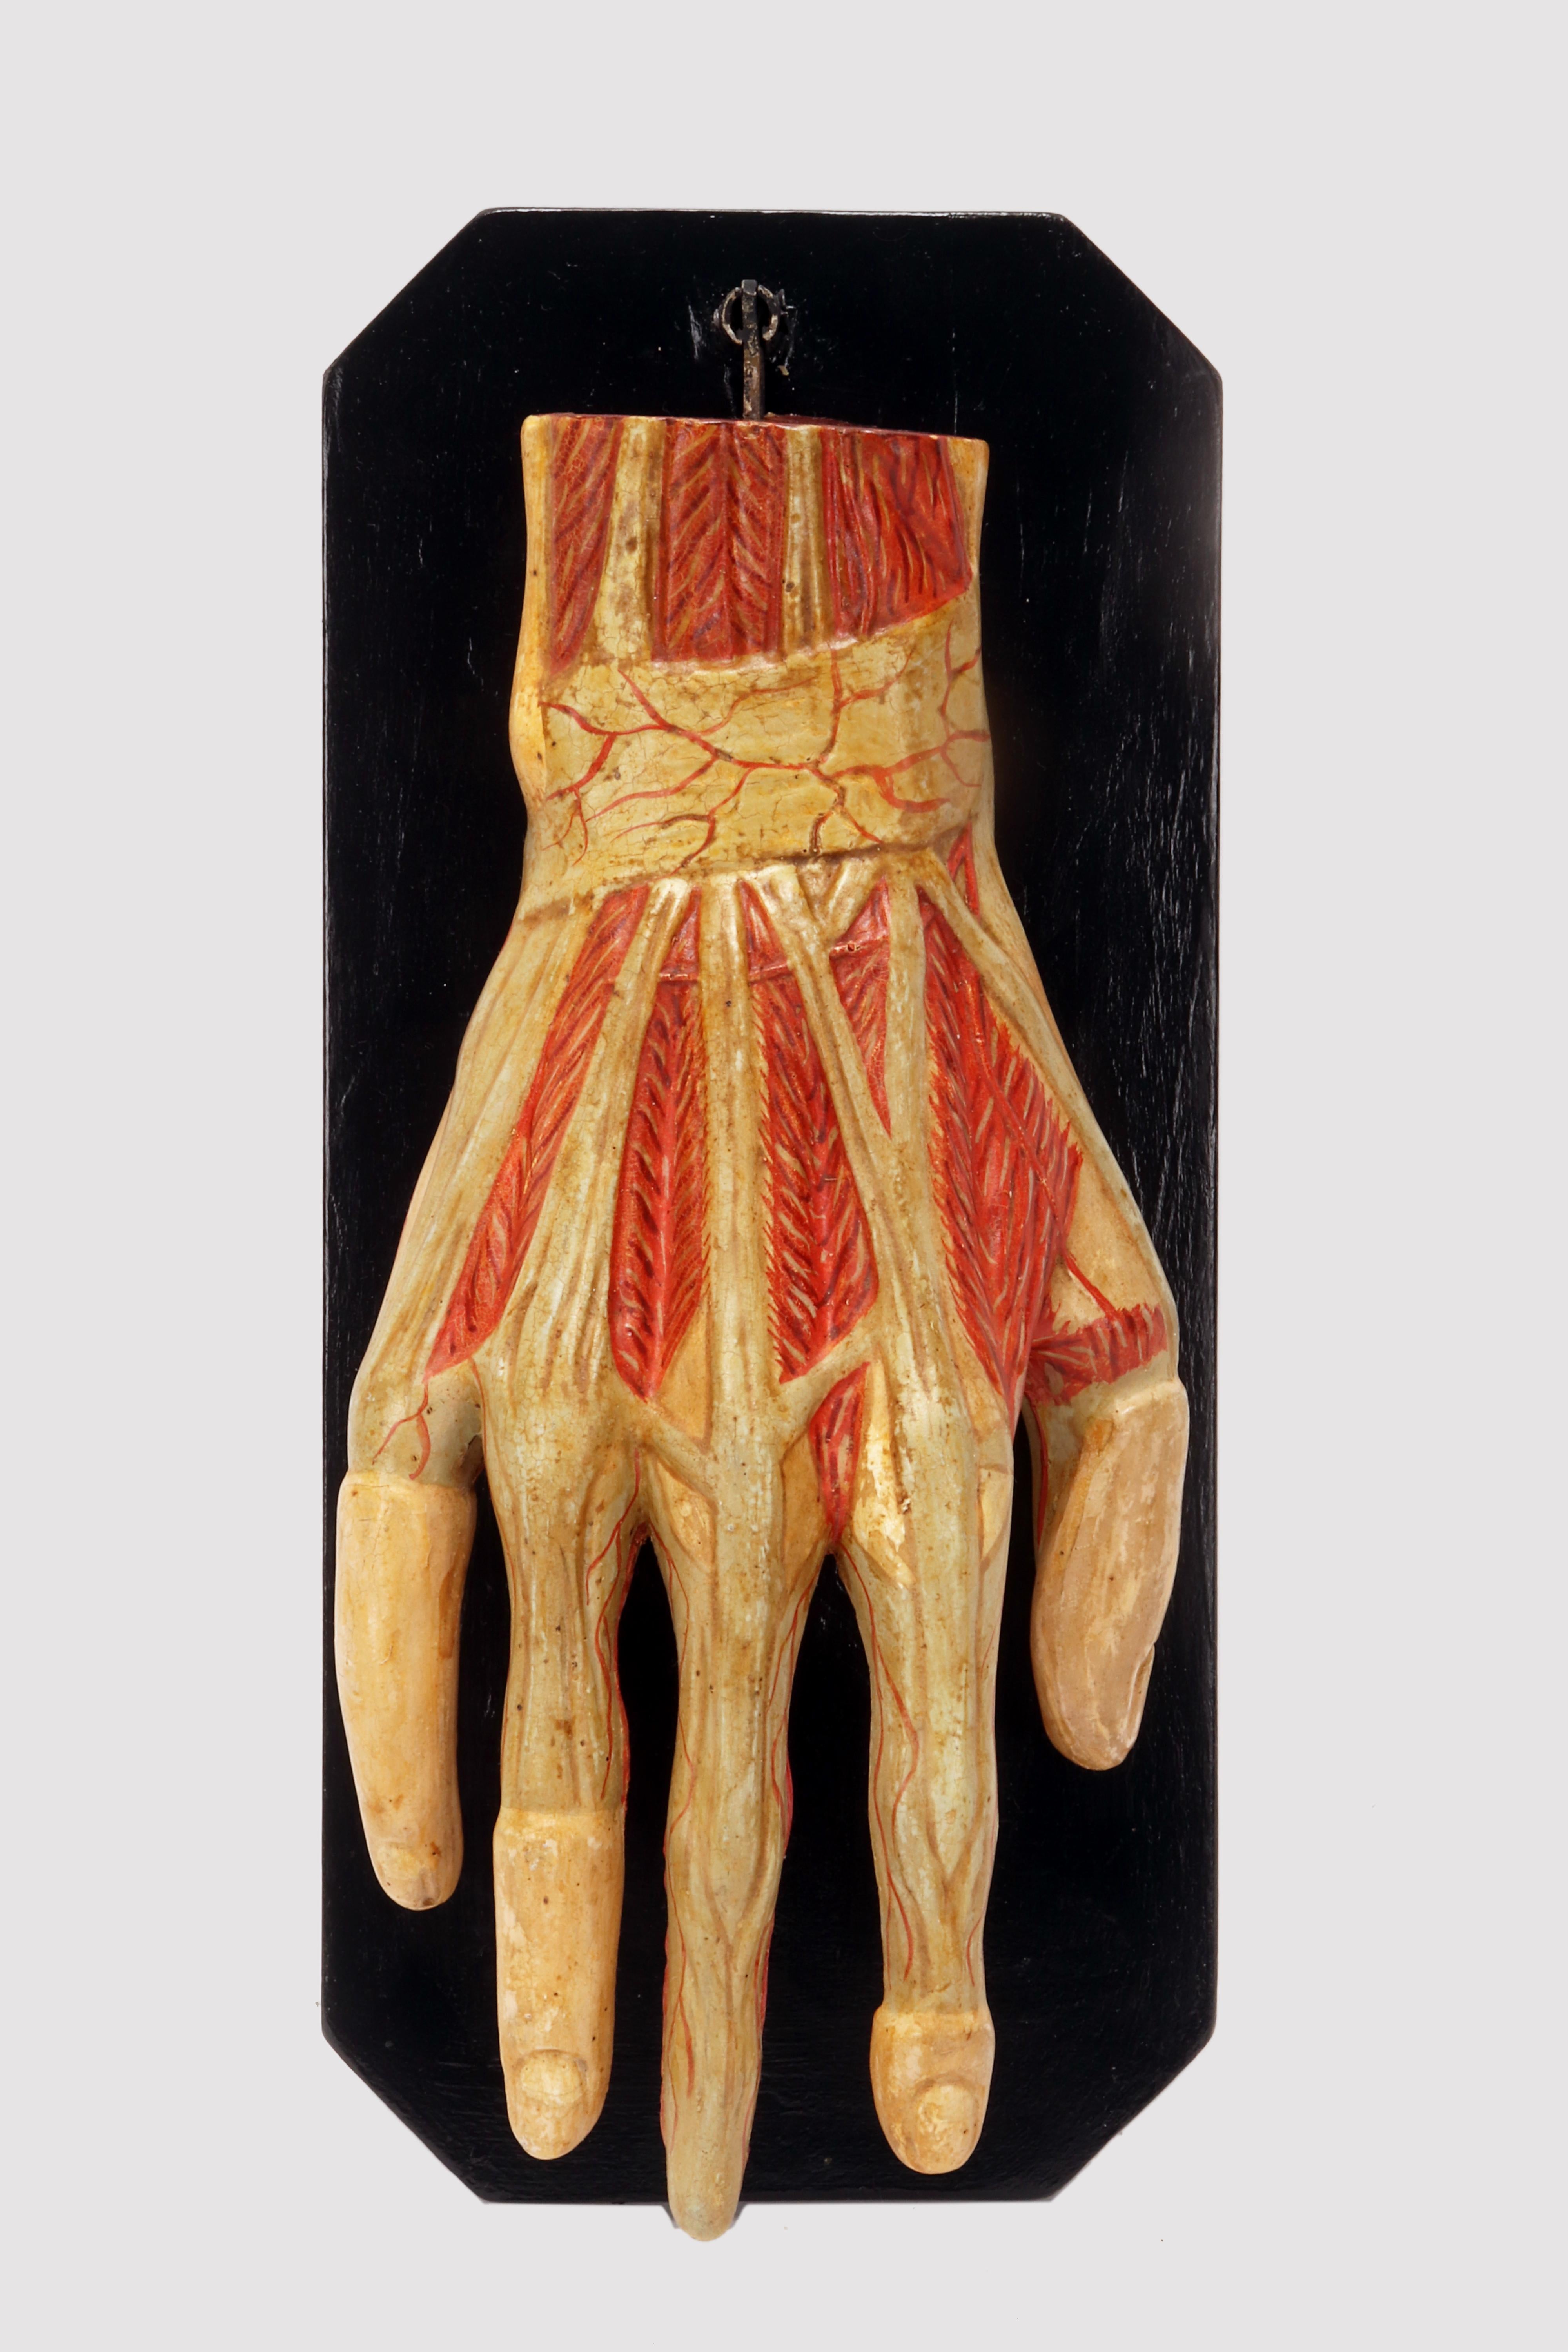 Anatomical model for schools, educational use, depicting the hand swinging on a fork supported by a black lacquered wooden base.
Made of plaster and finished entirely in colour. Italy circa 1900.
